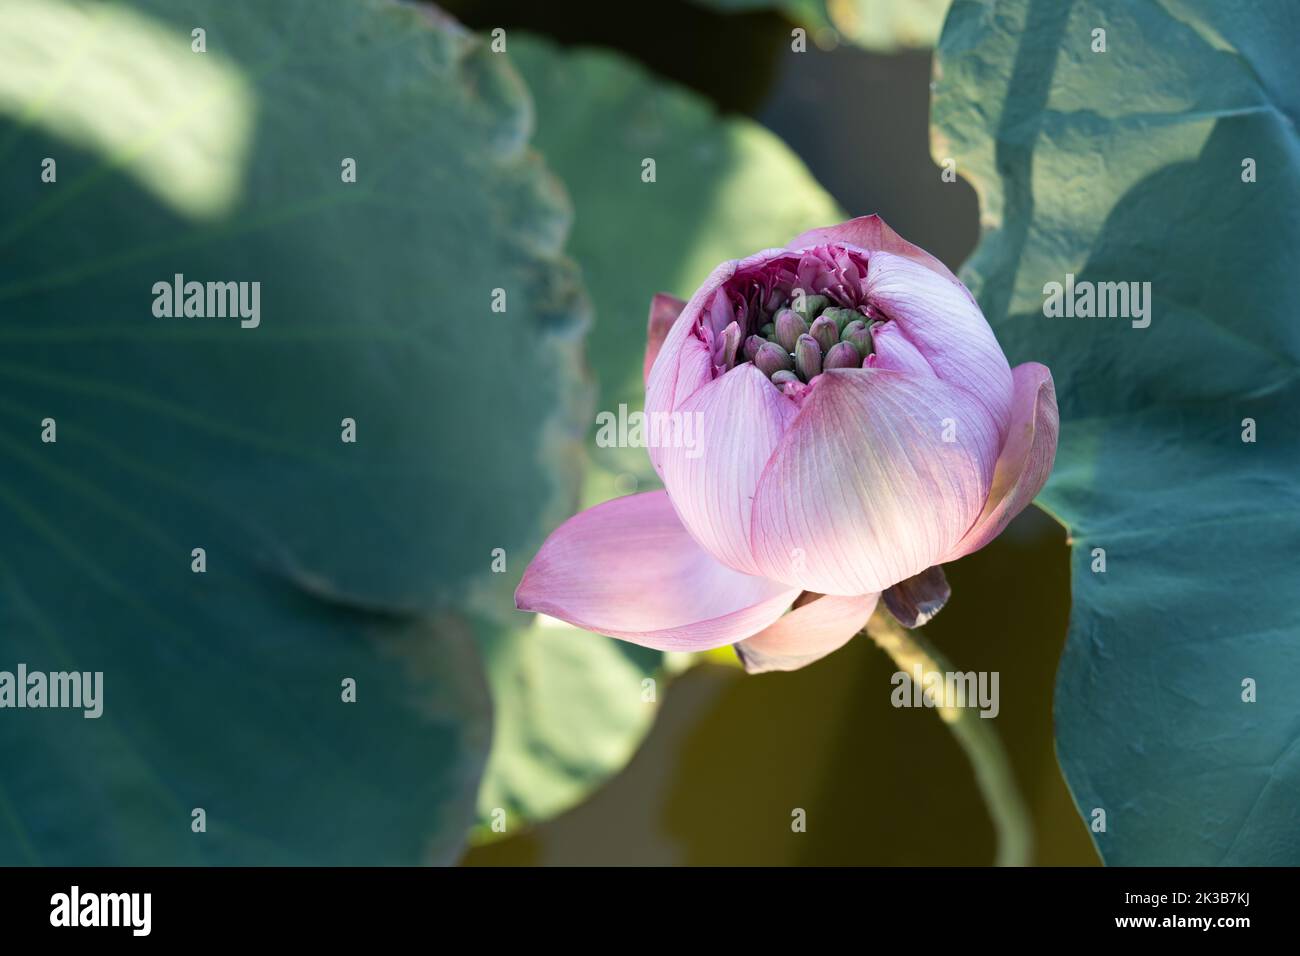 lotus flower in a pond Stock Photo